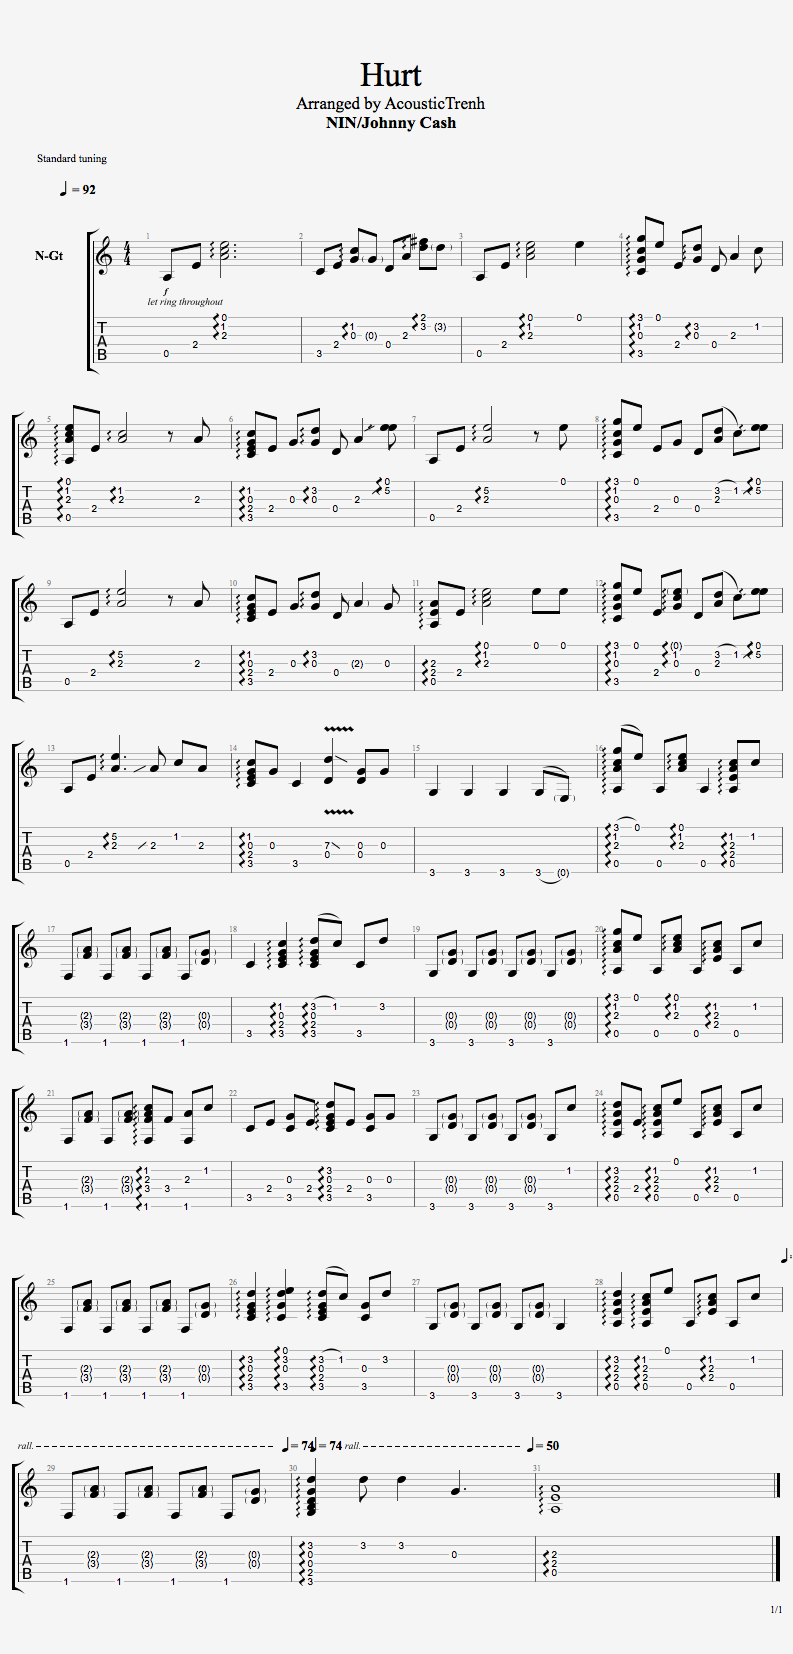 Rapp Snitch Knishes Sheet music for Guitar (Solo)